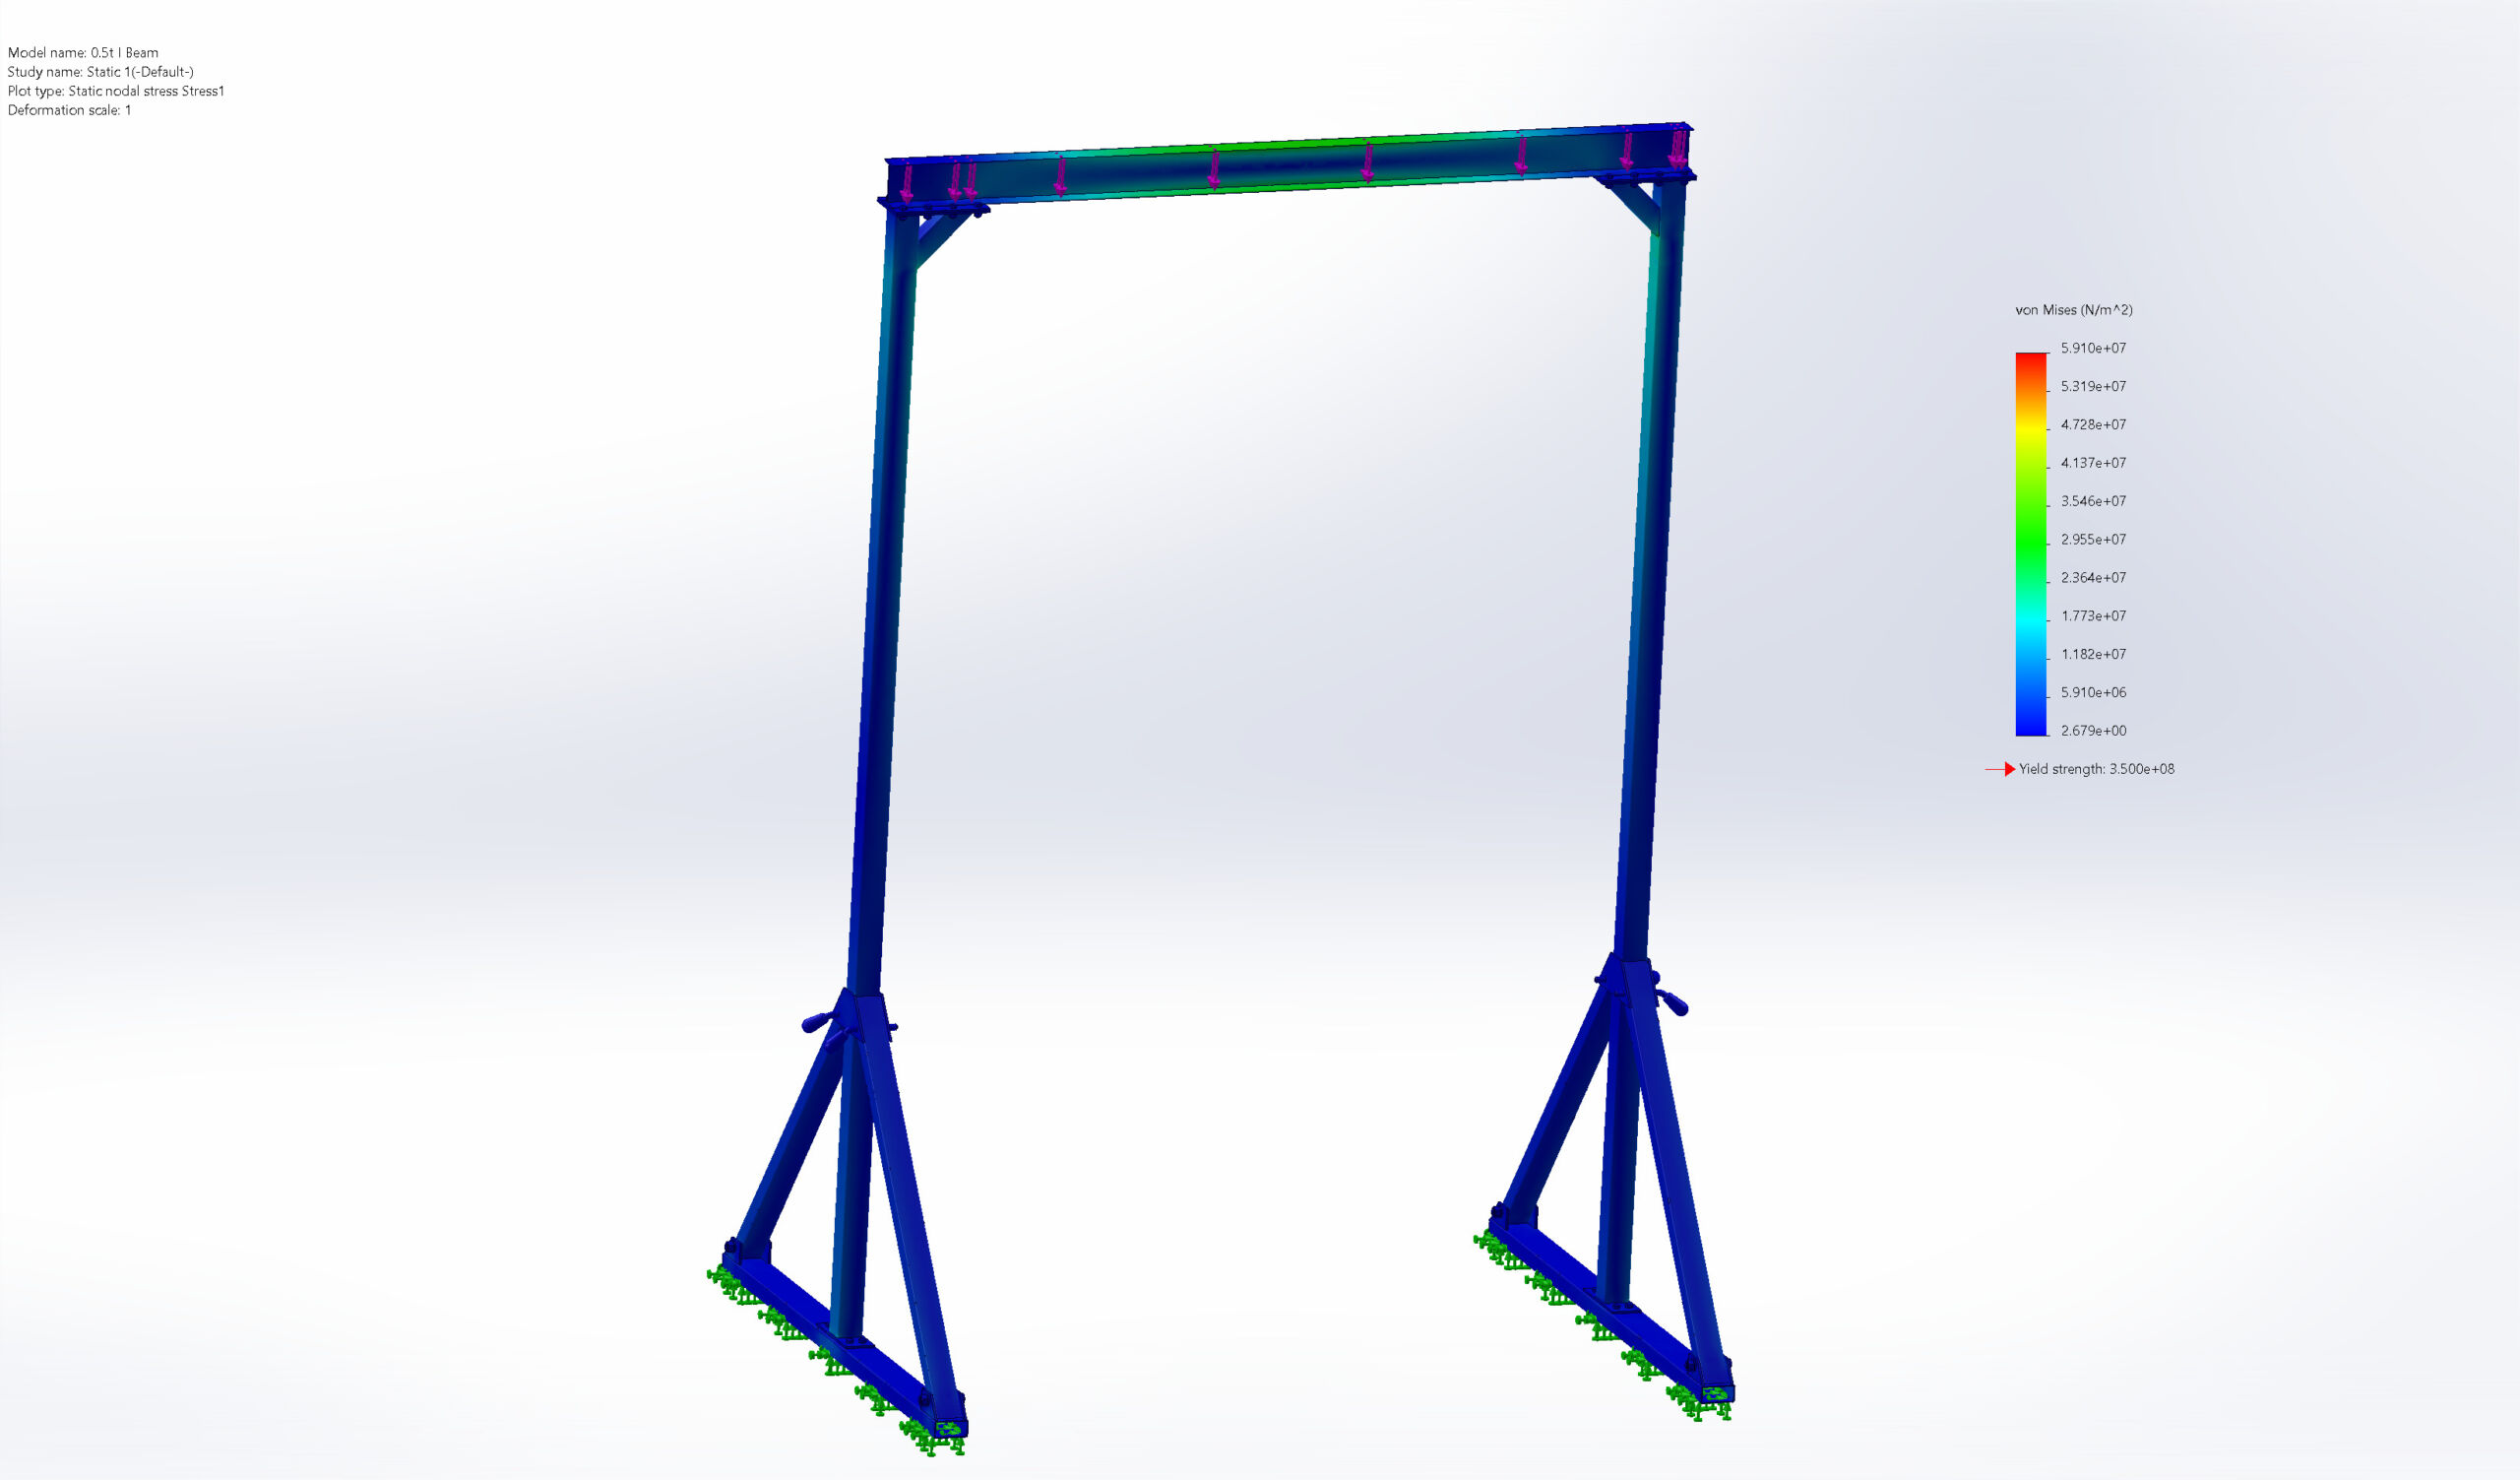 A CAD software screen displaying a stress test simulation for an Admalite gantry crane. The image highlights the detailed analysis and optimization of load conditions and mechanical stresses, demonstrating Admalite's commitment to precision engineering and safety in crane design.